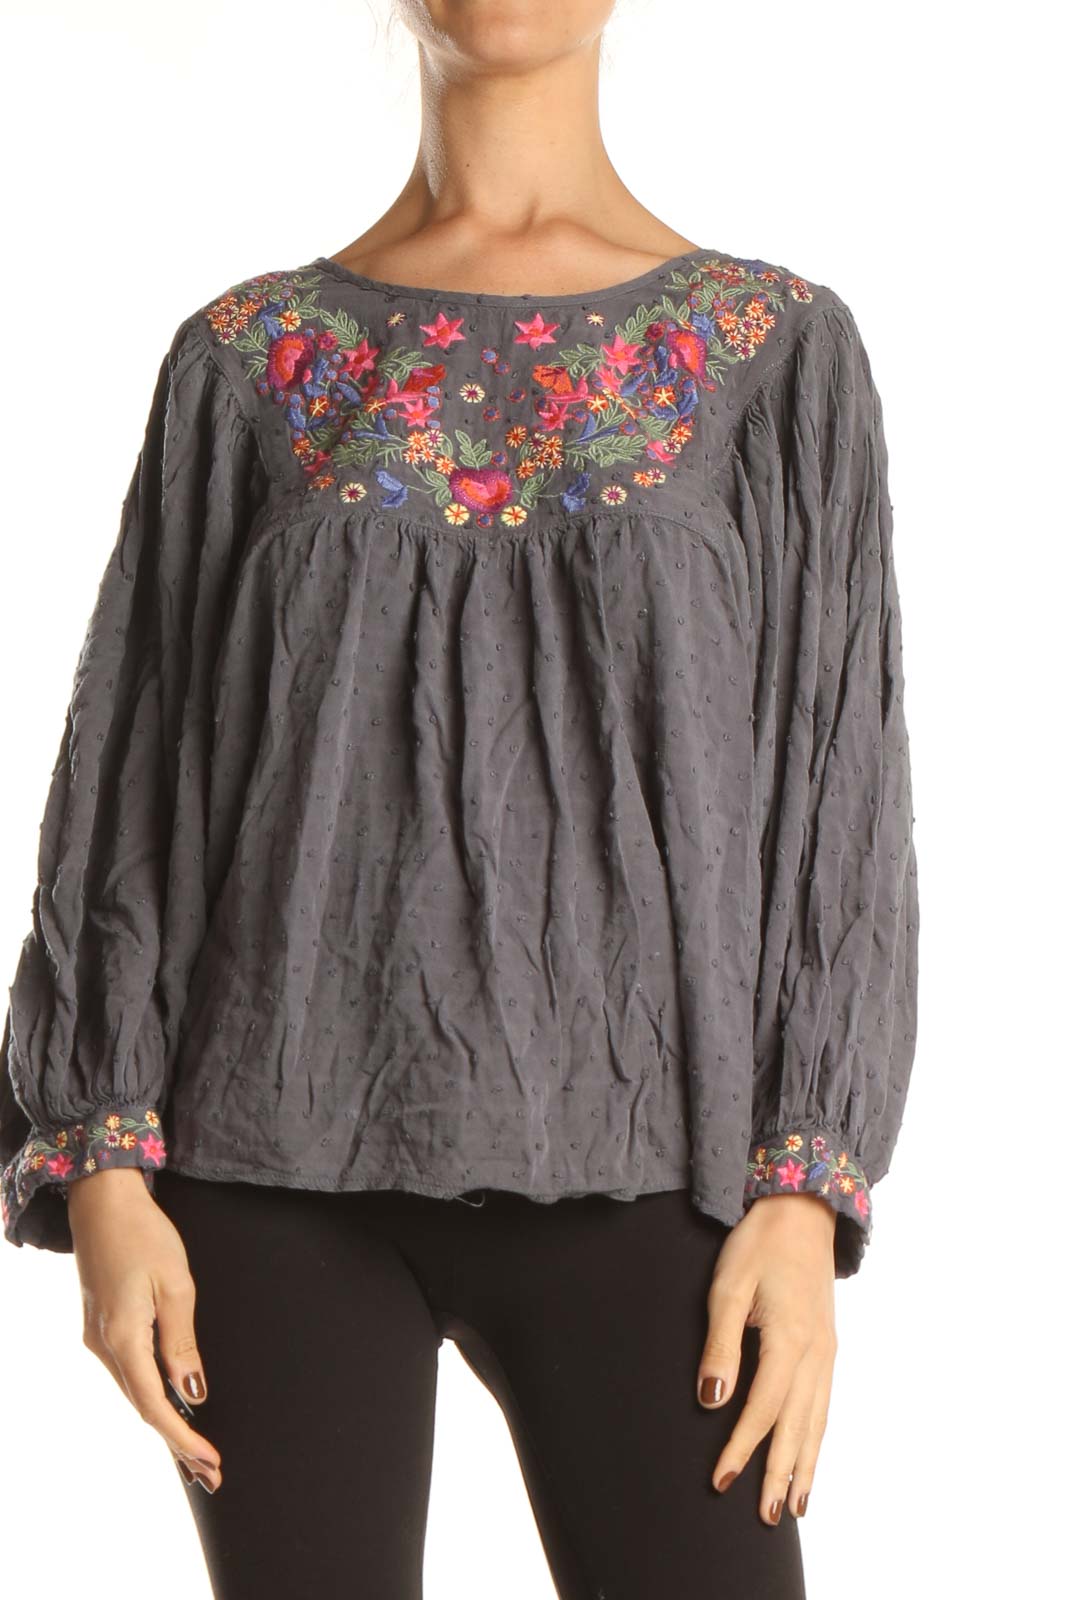 Gray Textured Floral Embroidered Bohemian Blouse Front